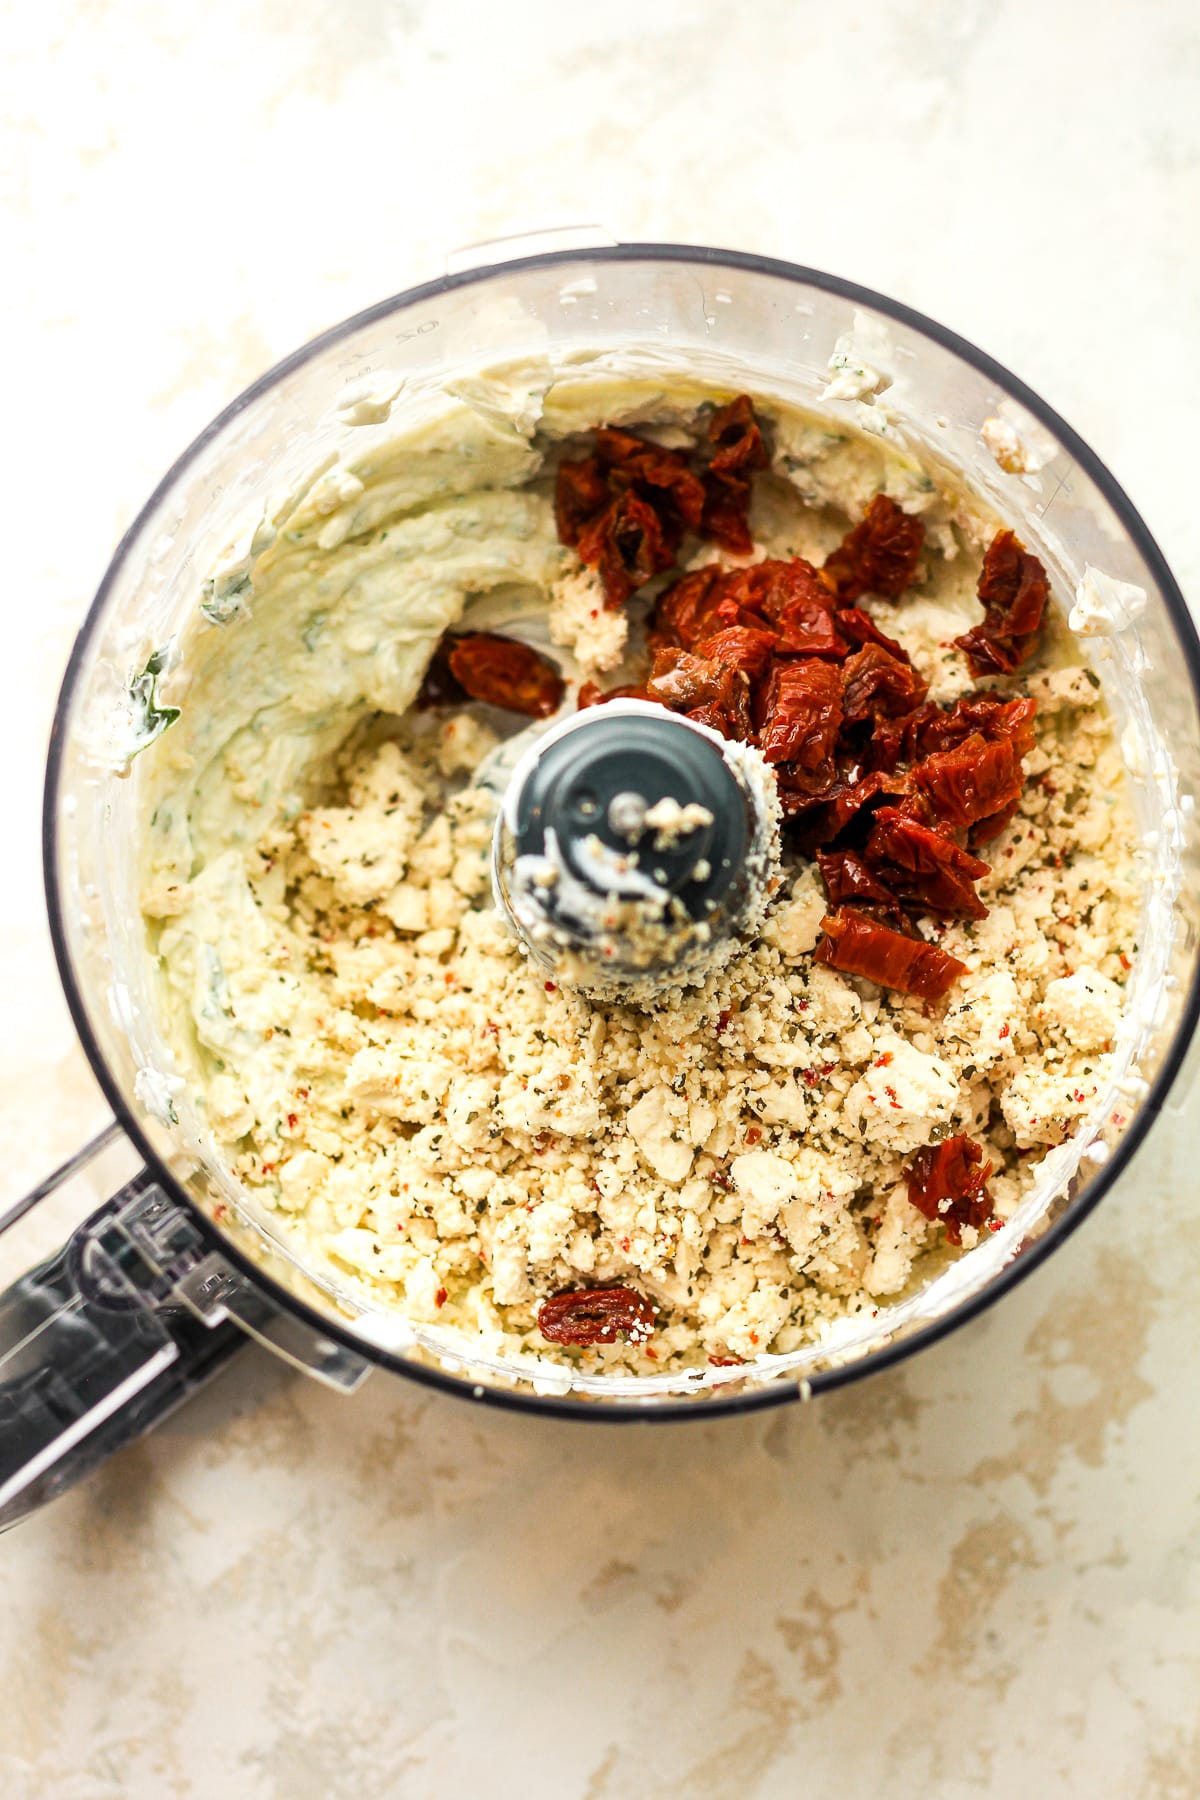 A food processor of the creamy ingredients plus feta crumbles and sun dried tomatoes on top.